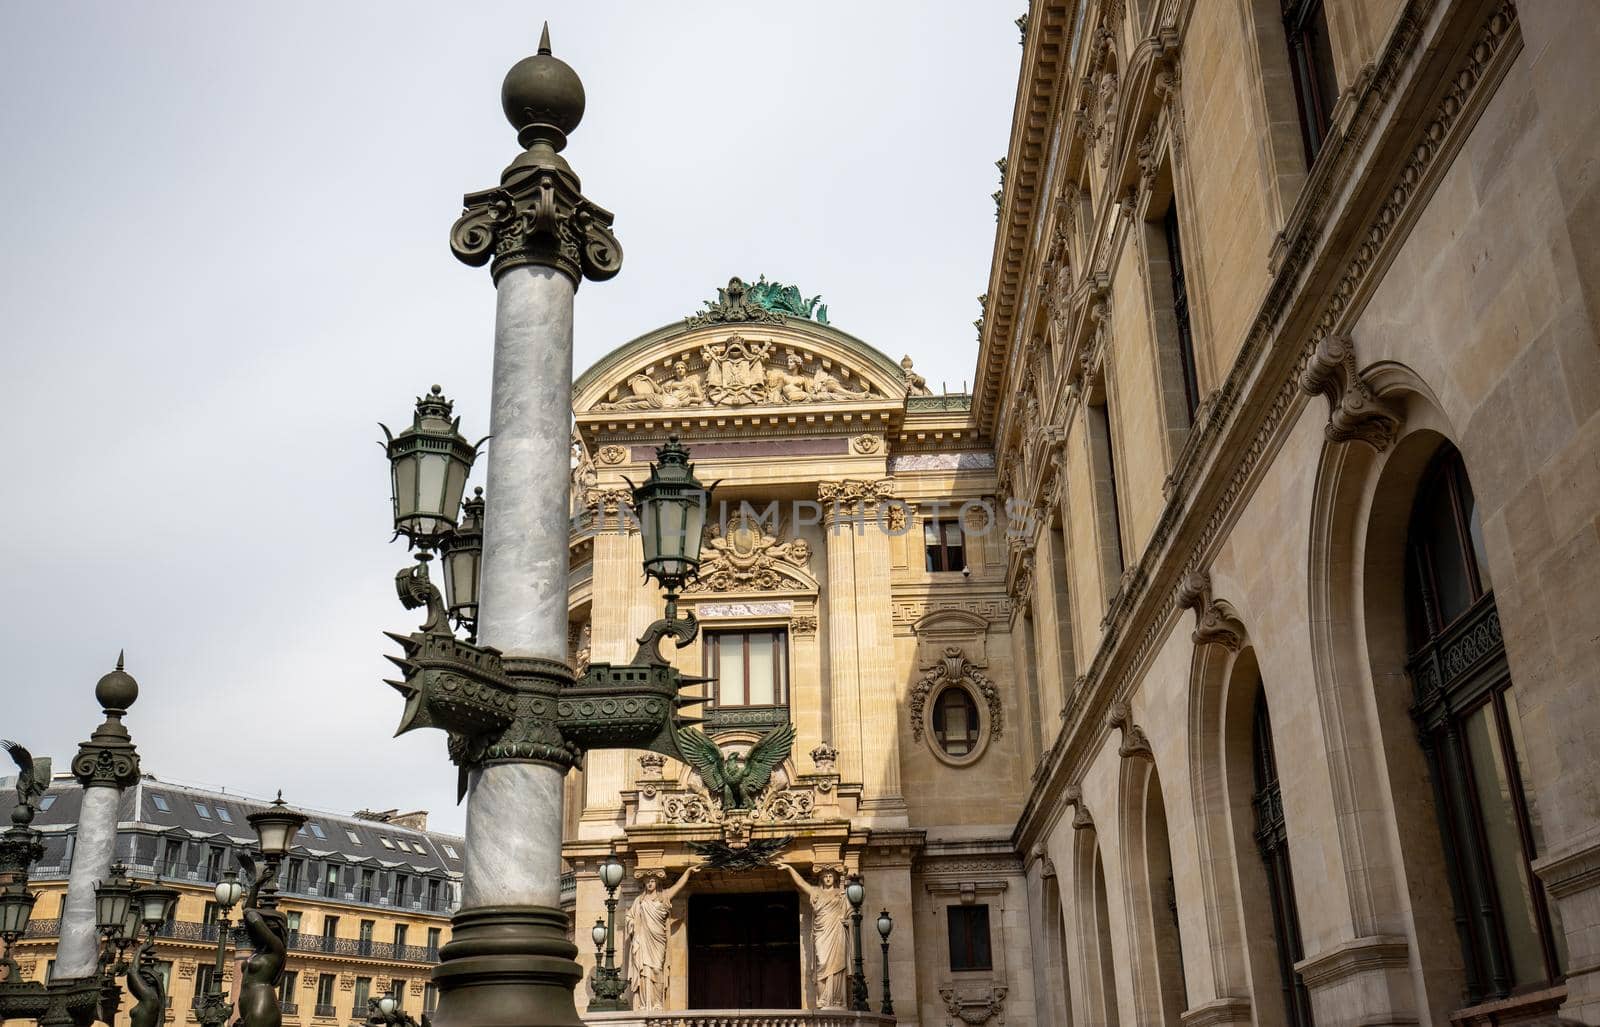 View at the back of the Paris Opera, France